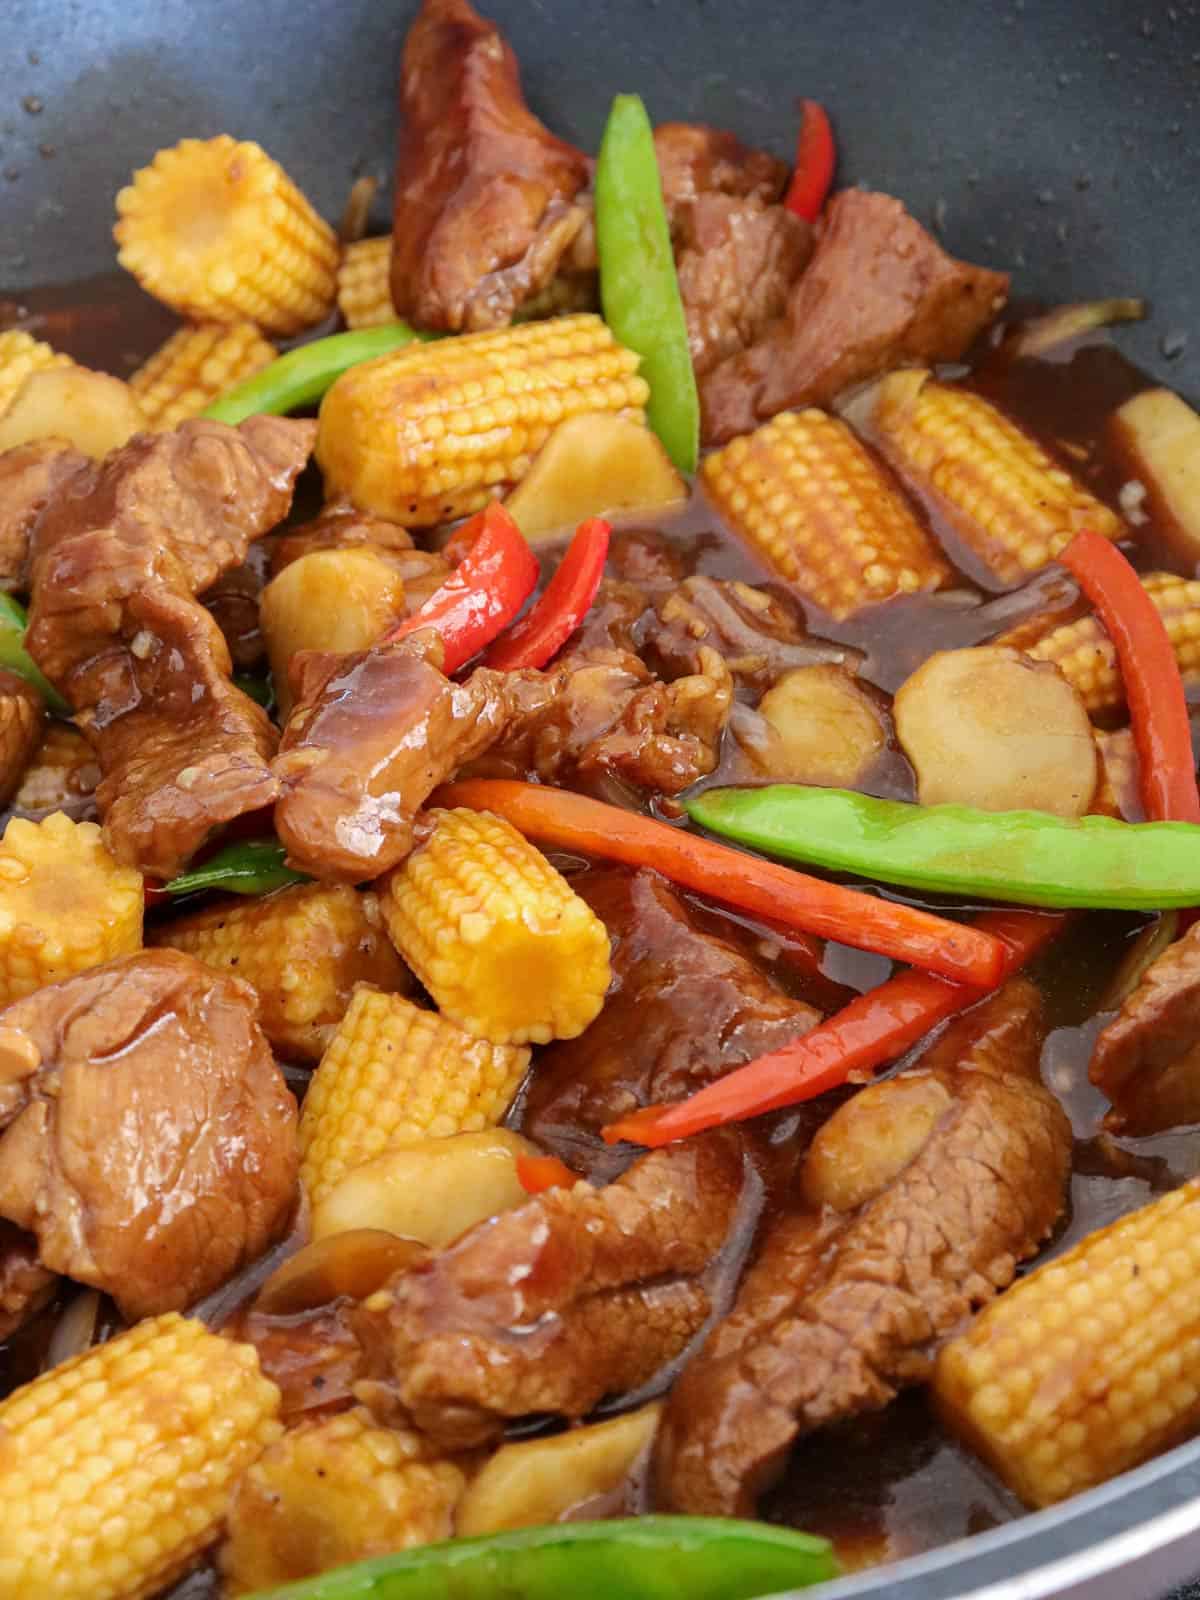 beef stir-fry with veggies in cooked in a pan.